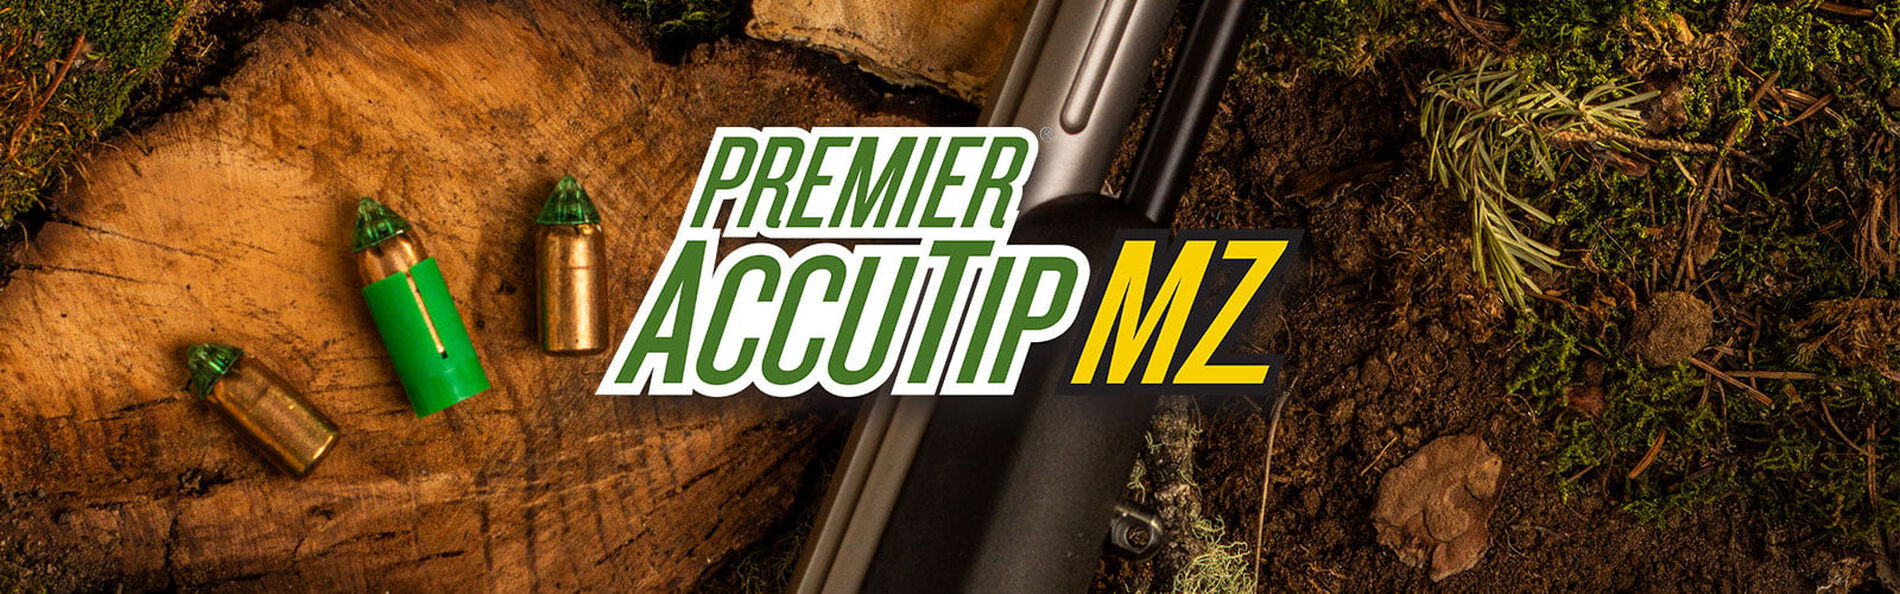 Muzzleloader and Premier AccuTip MZ rounds laying on a table with Premier AccuTip MZ logo overlay